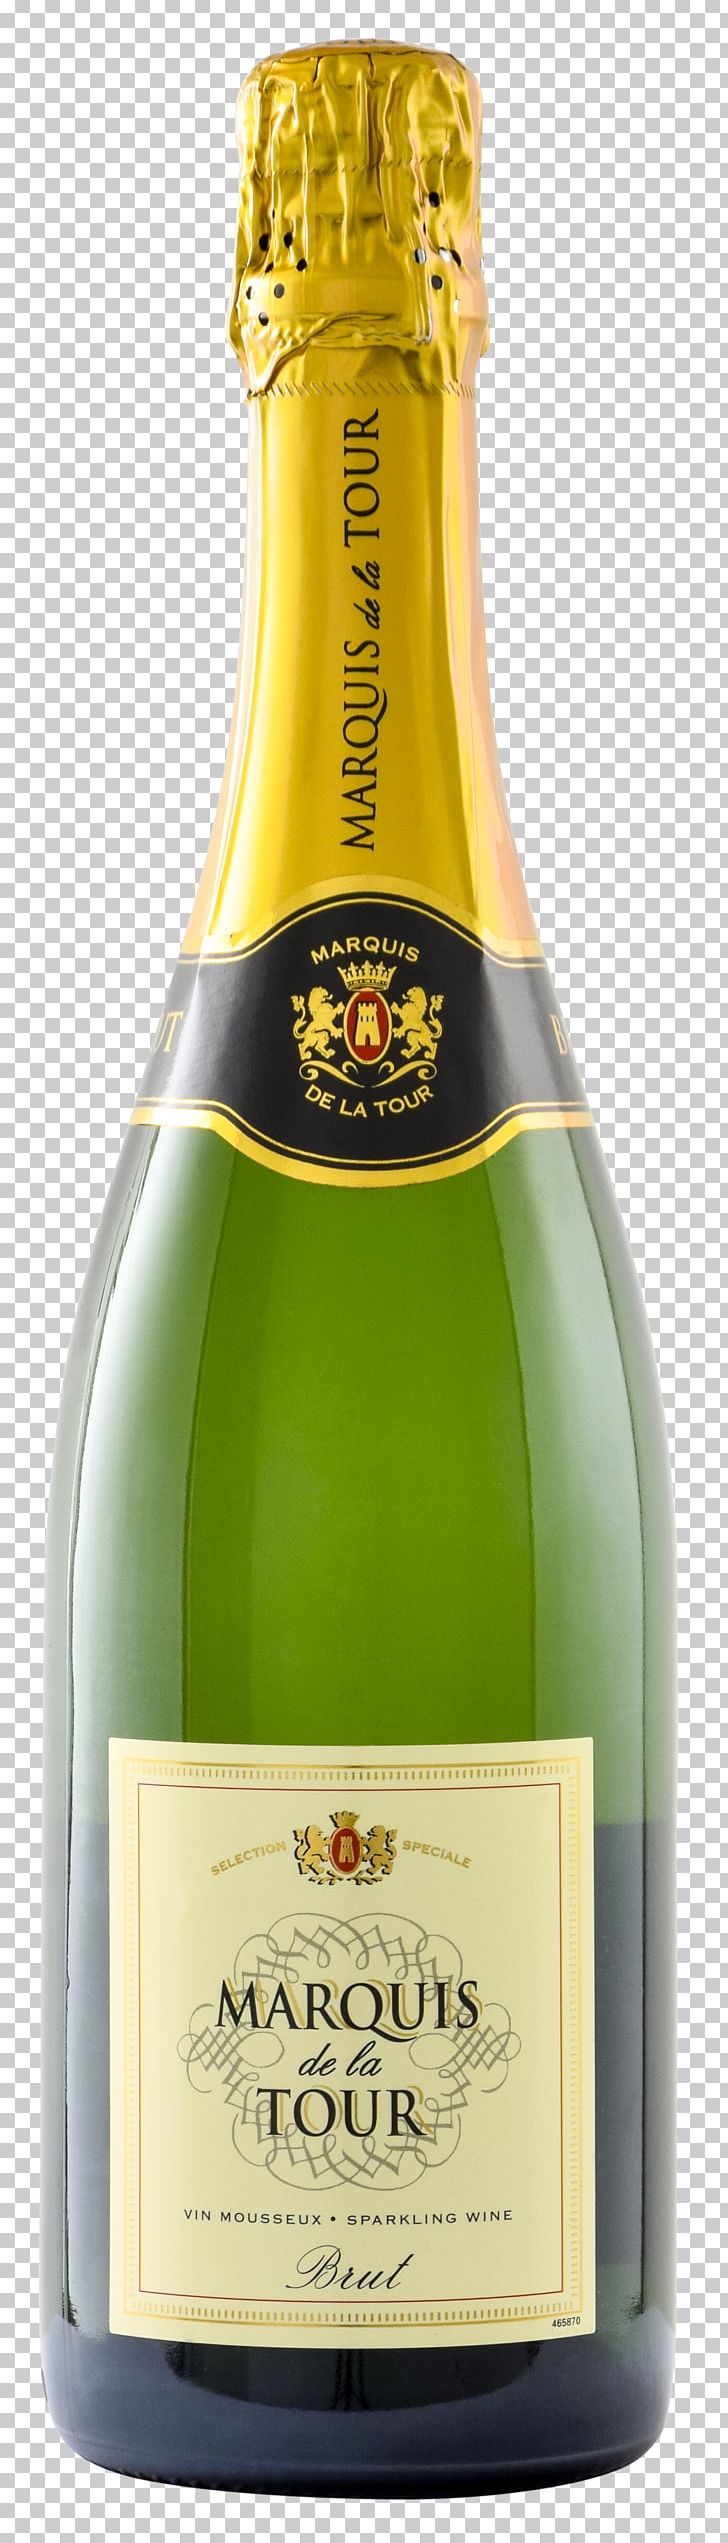 Champagne Sparkling Wine Moet & Chandon Imperial Brut Chardonnay PNG, Clipart, Alcoholic Beverage, Bottle, Champagne, Chardonnay, Chenin Blanc Free PNG Download